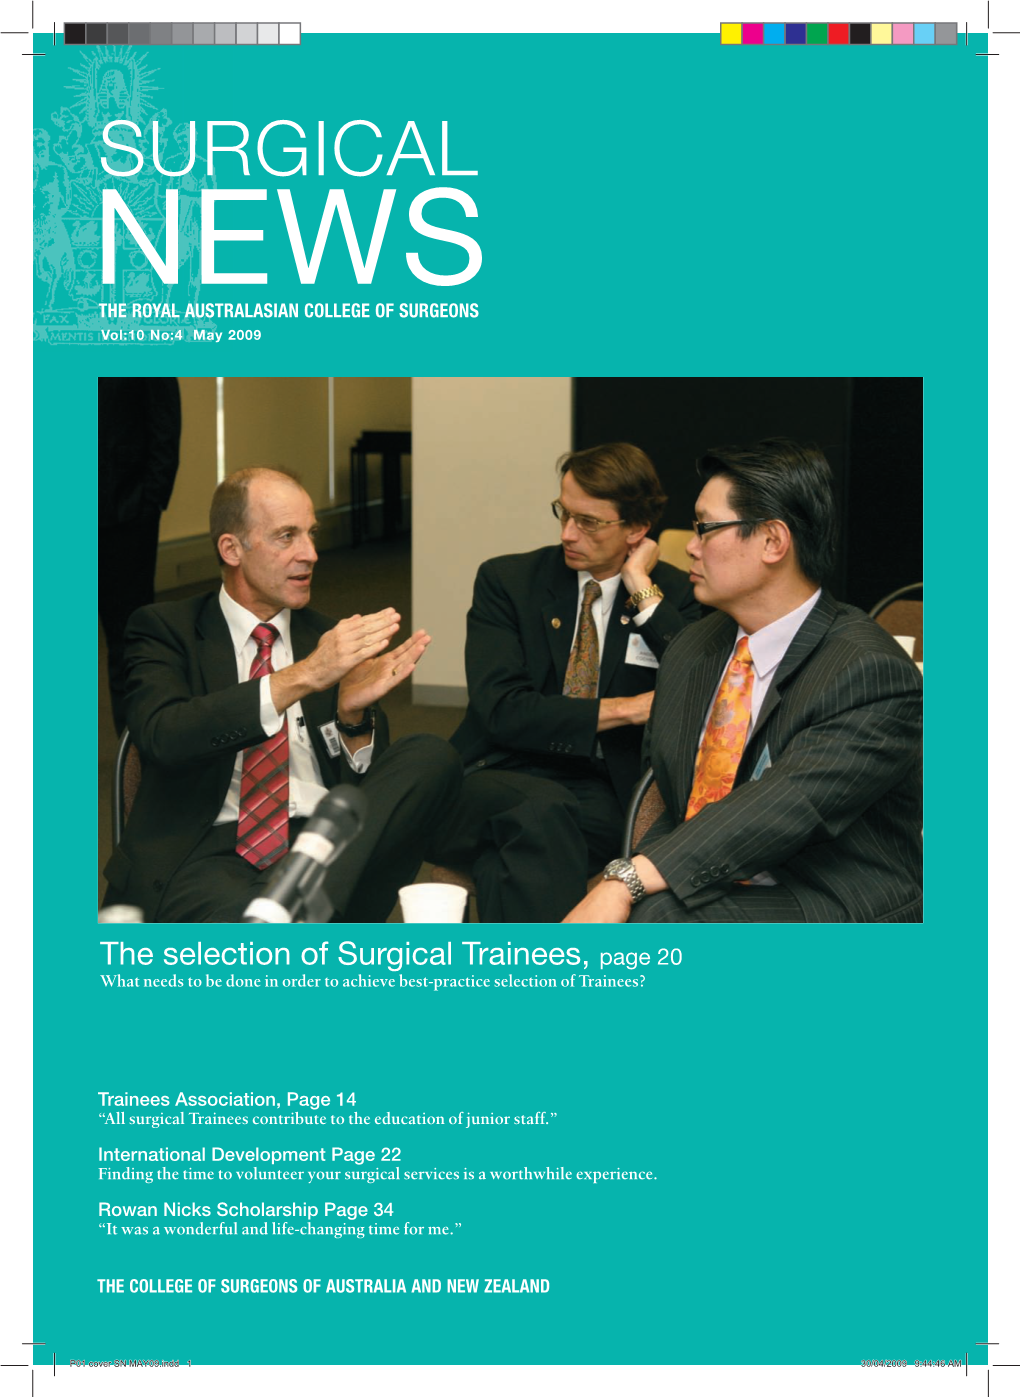 SURGICAL NEWS the ROYAL AUSTRALASIAN COLLEGE of SURGEONS Vol:10 No:4 May 2009